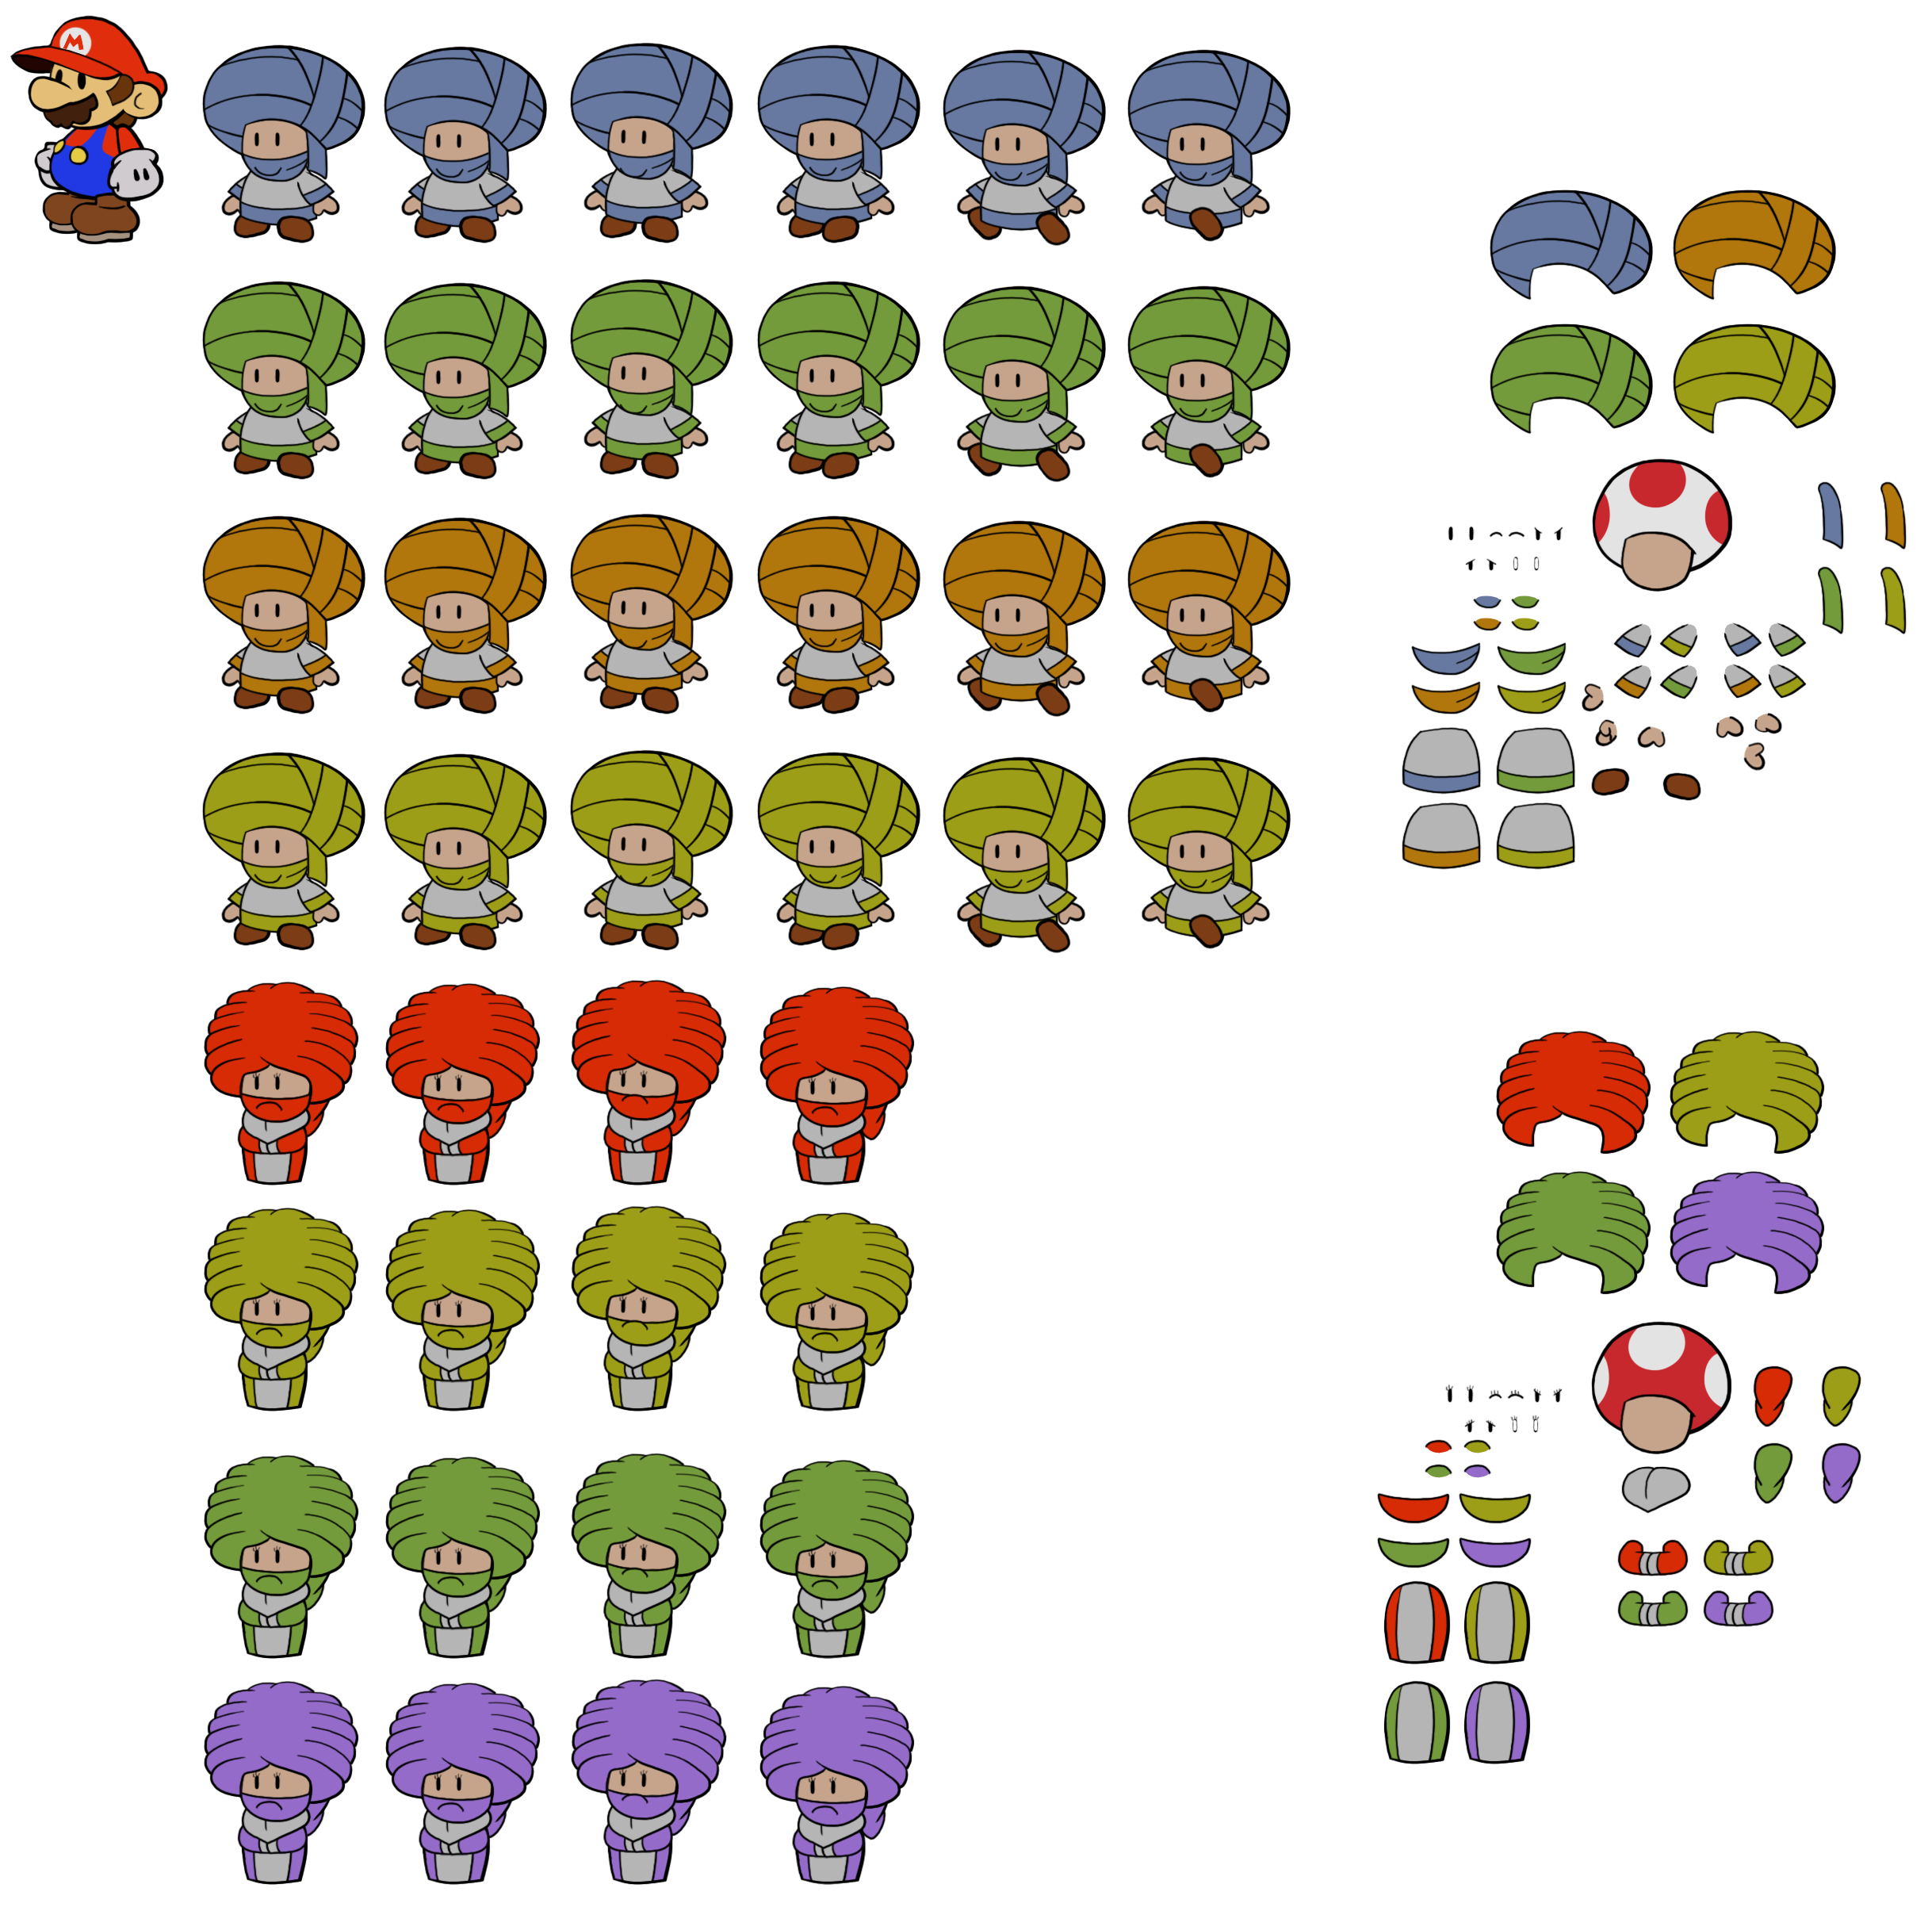 Toad NPCs - Dry Dry Toads (Paper Mario-Style). 